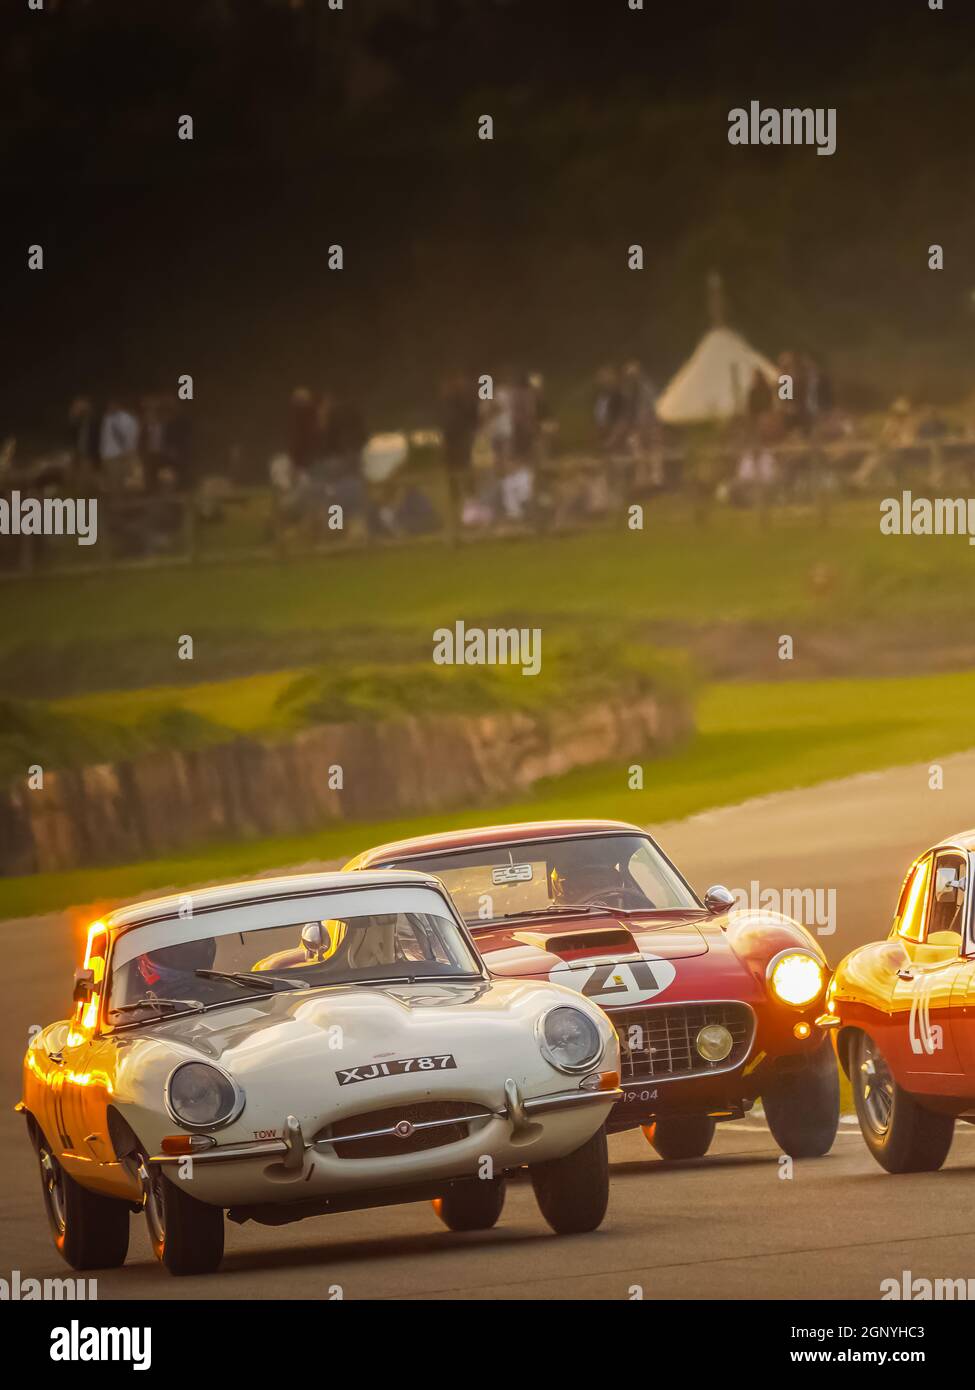 E Type Jaguar and Ferrari 250 racing at sunset at the Goodwood Revival 2021, West Sussex, uk Stock Photo